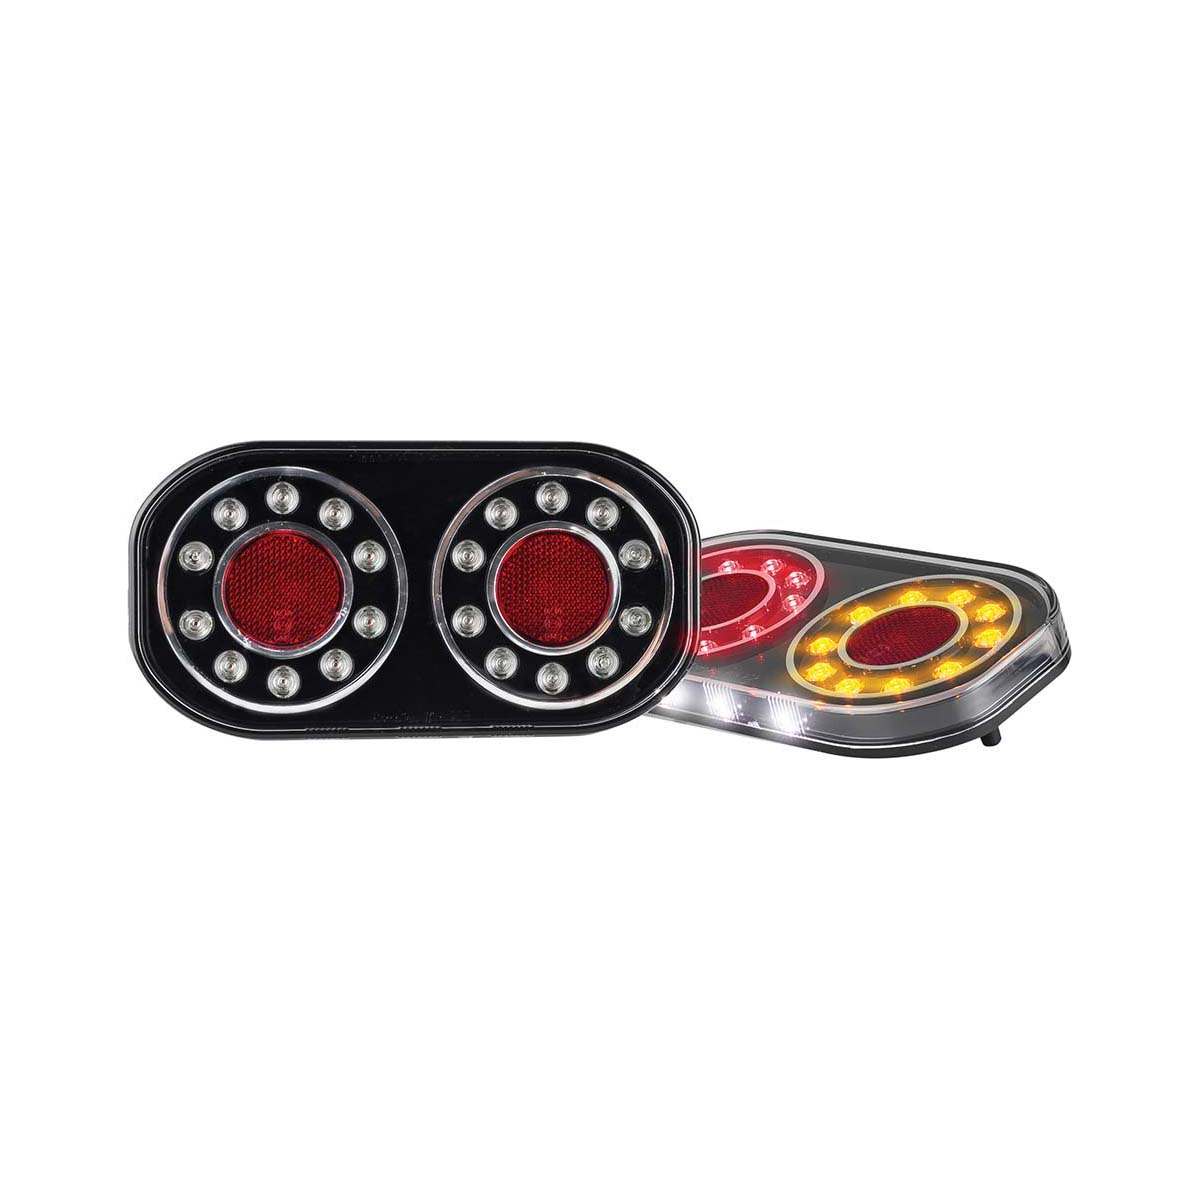 LED Autolamps Submersible 209 Series Trailer Lights